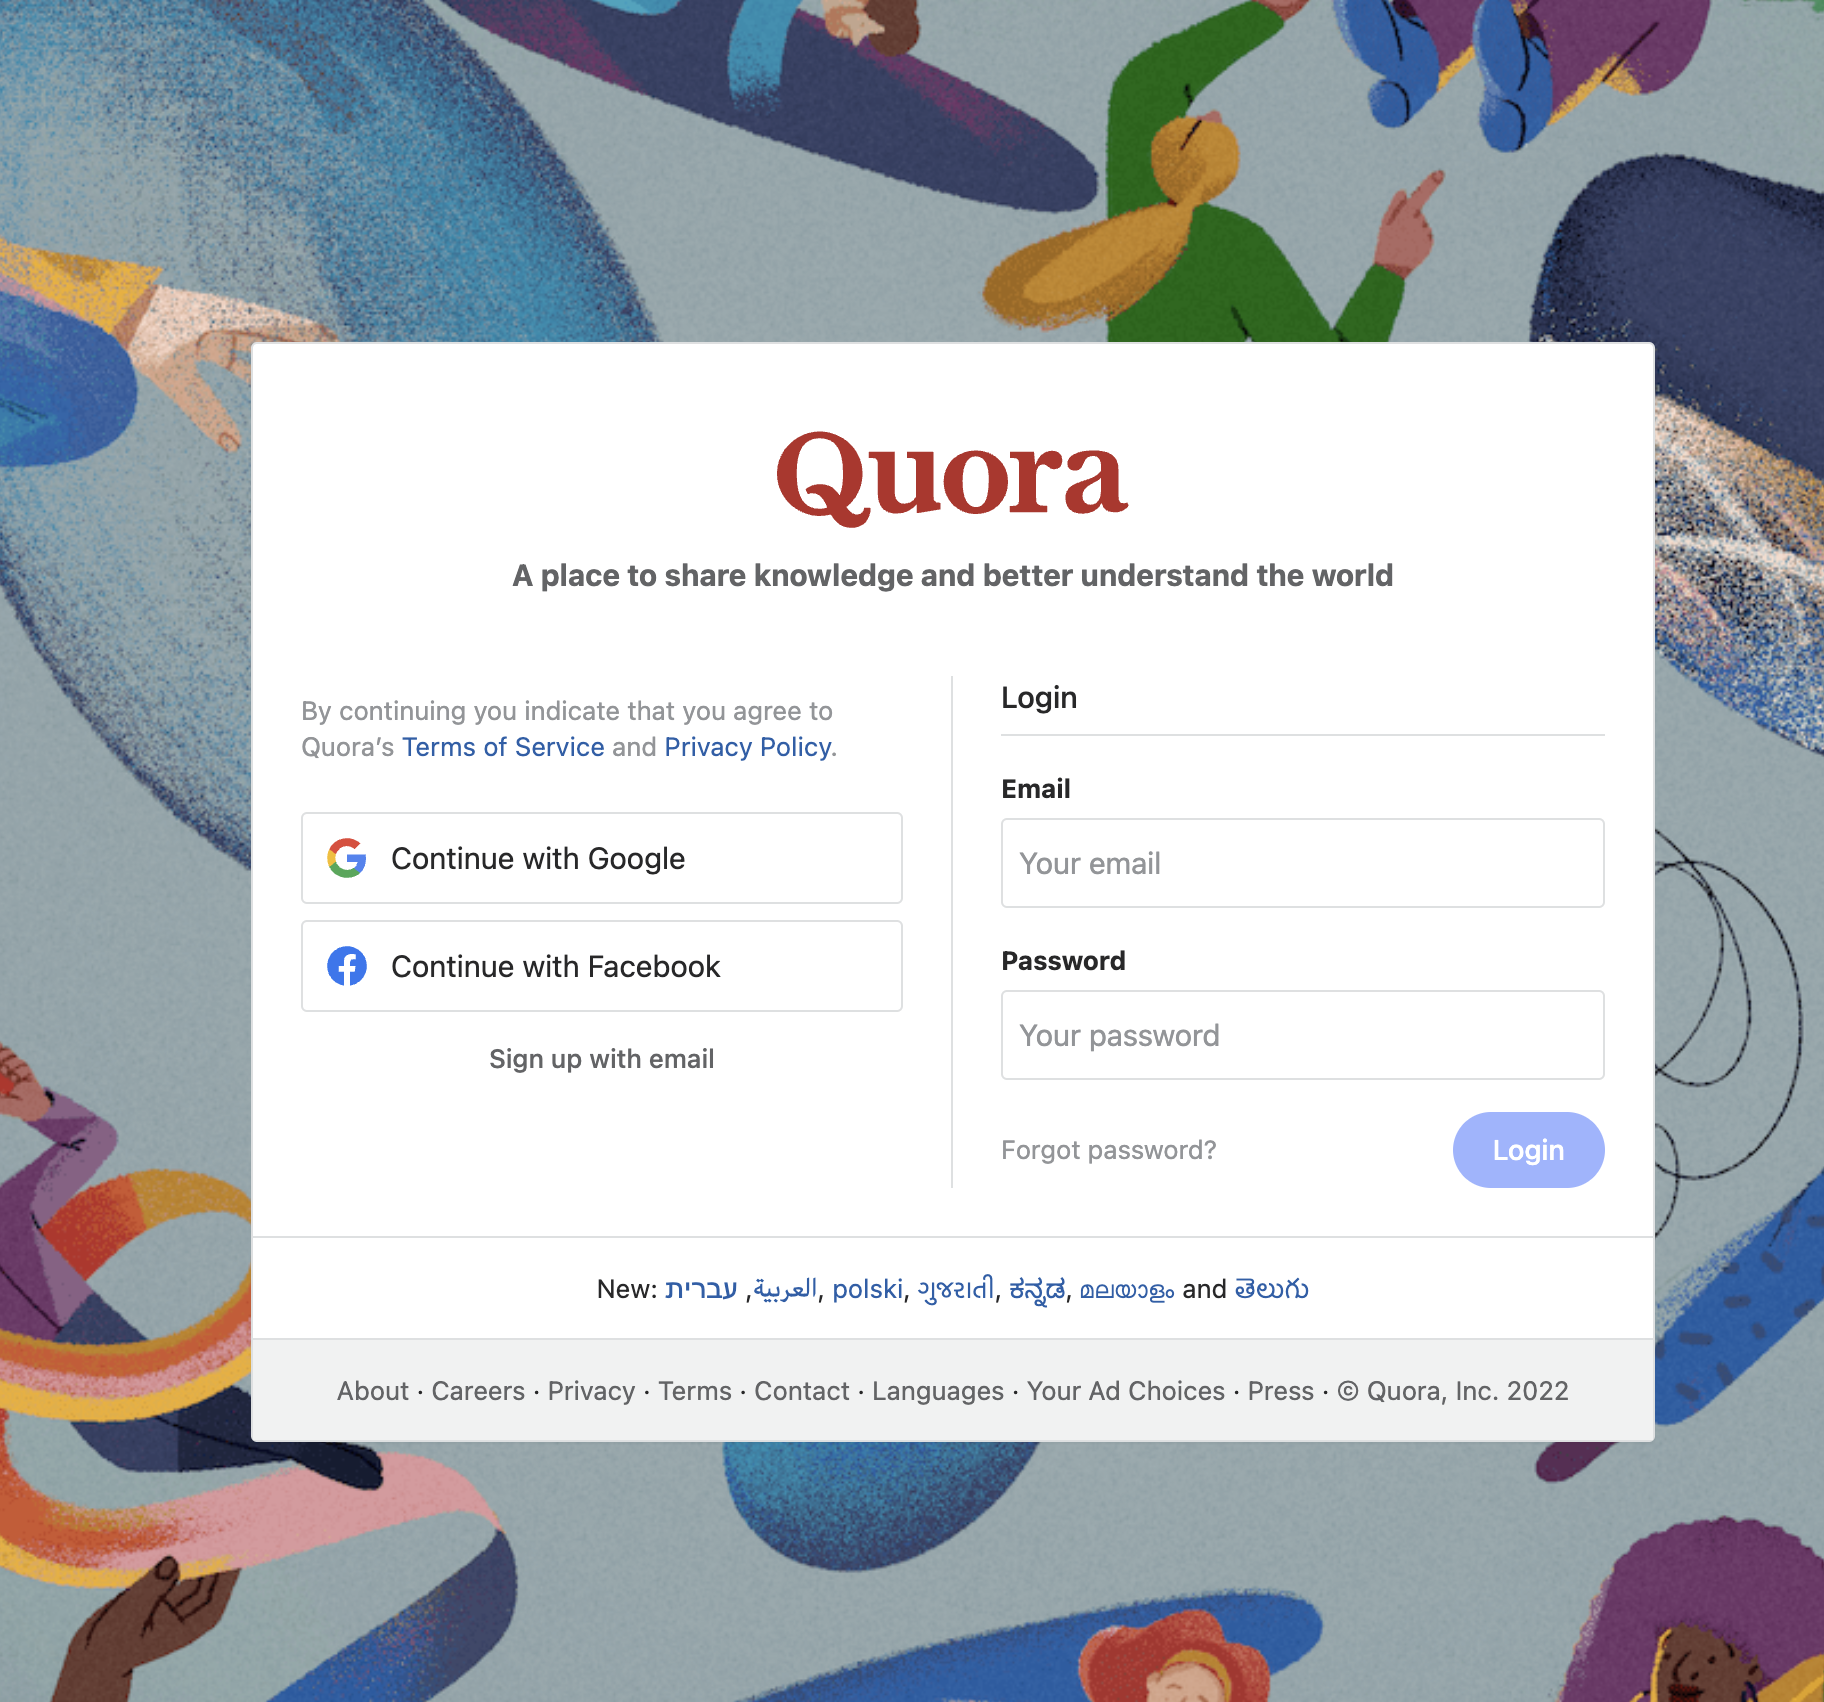 Quora's sign up page